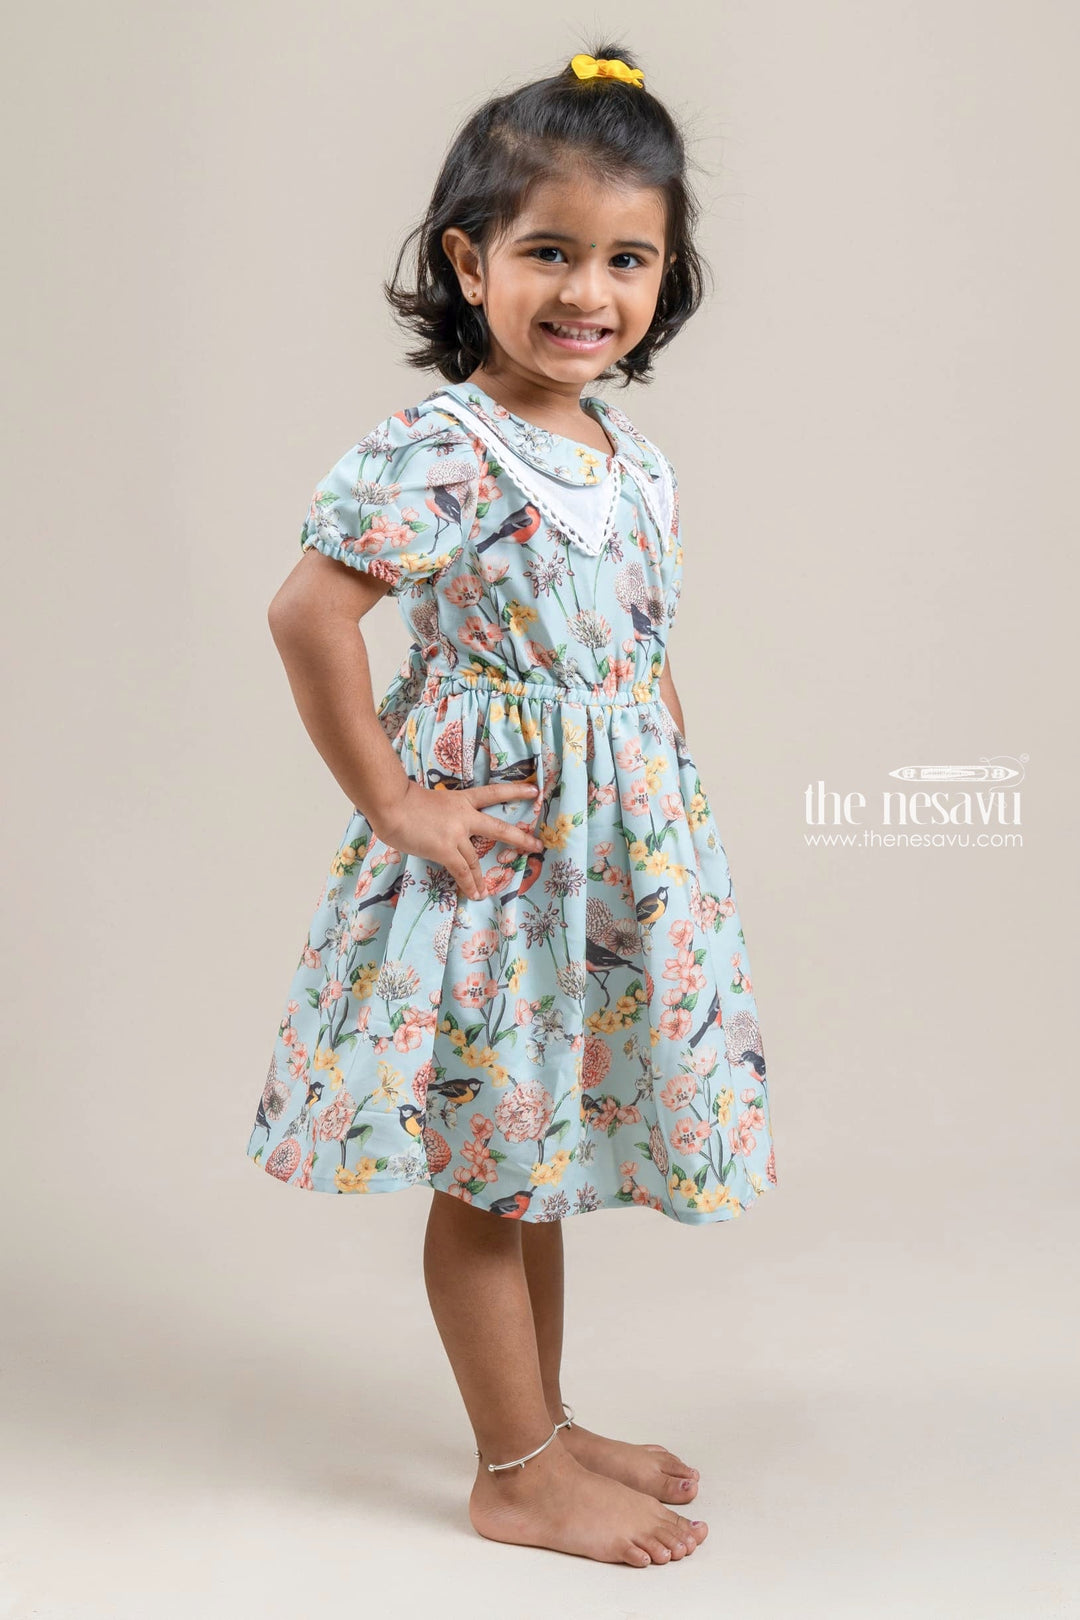 The Nesavu Girls Fancy Frock Charming Floral N Bird Printed Turquoise Casual Cotton Frock For Girls Nesavu Floral Printed Cotton frock For Kids | New Cotton Dress For Girls | The Nesavu